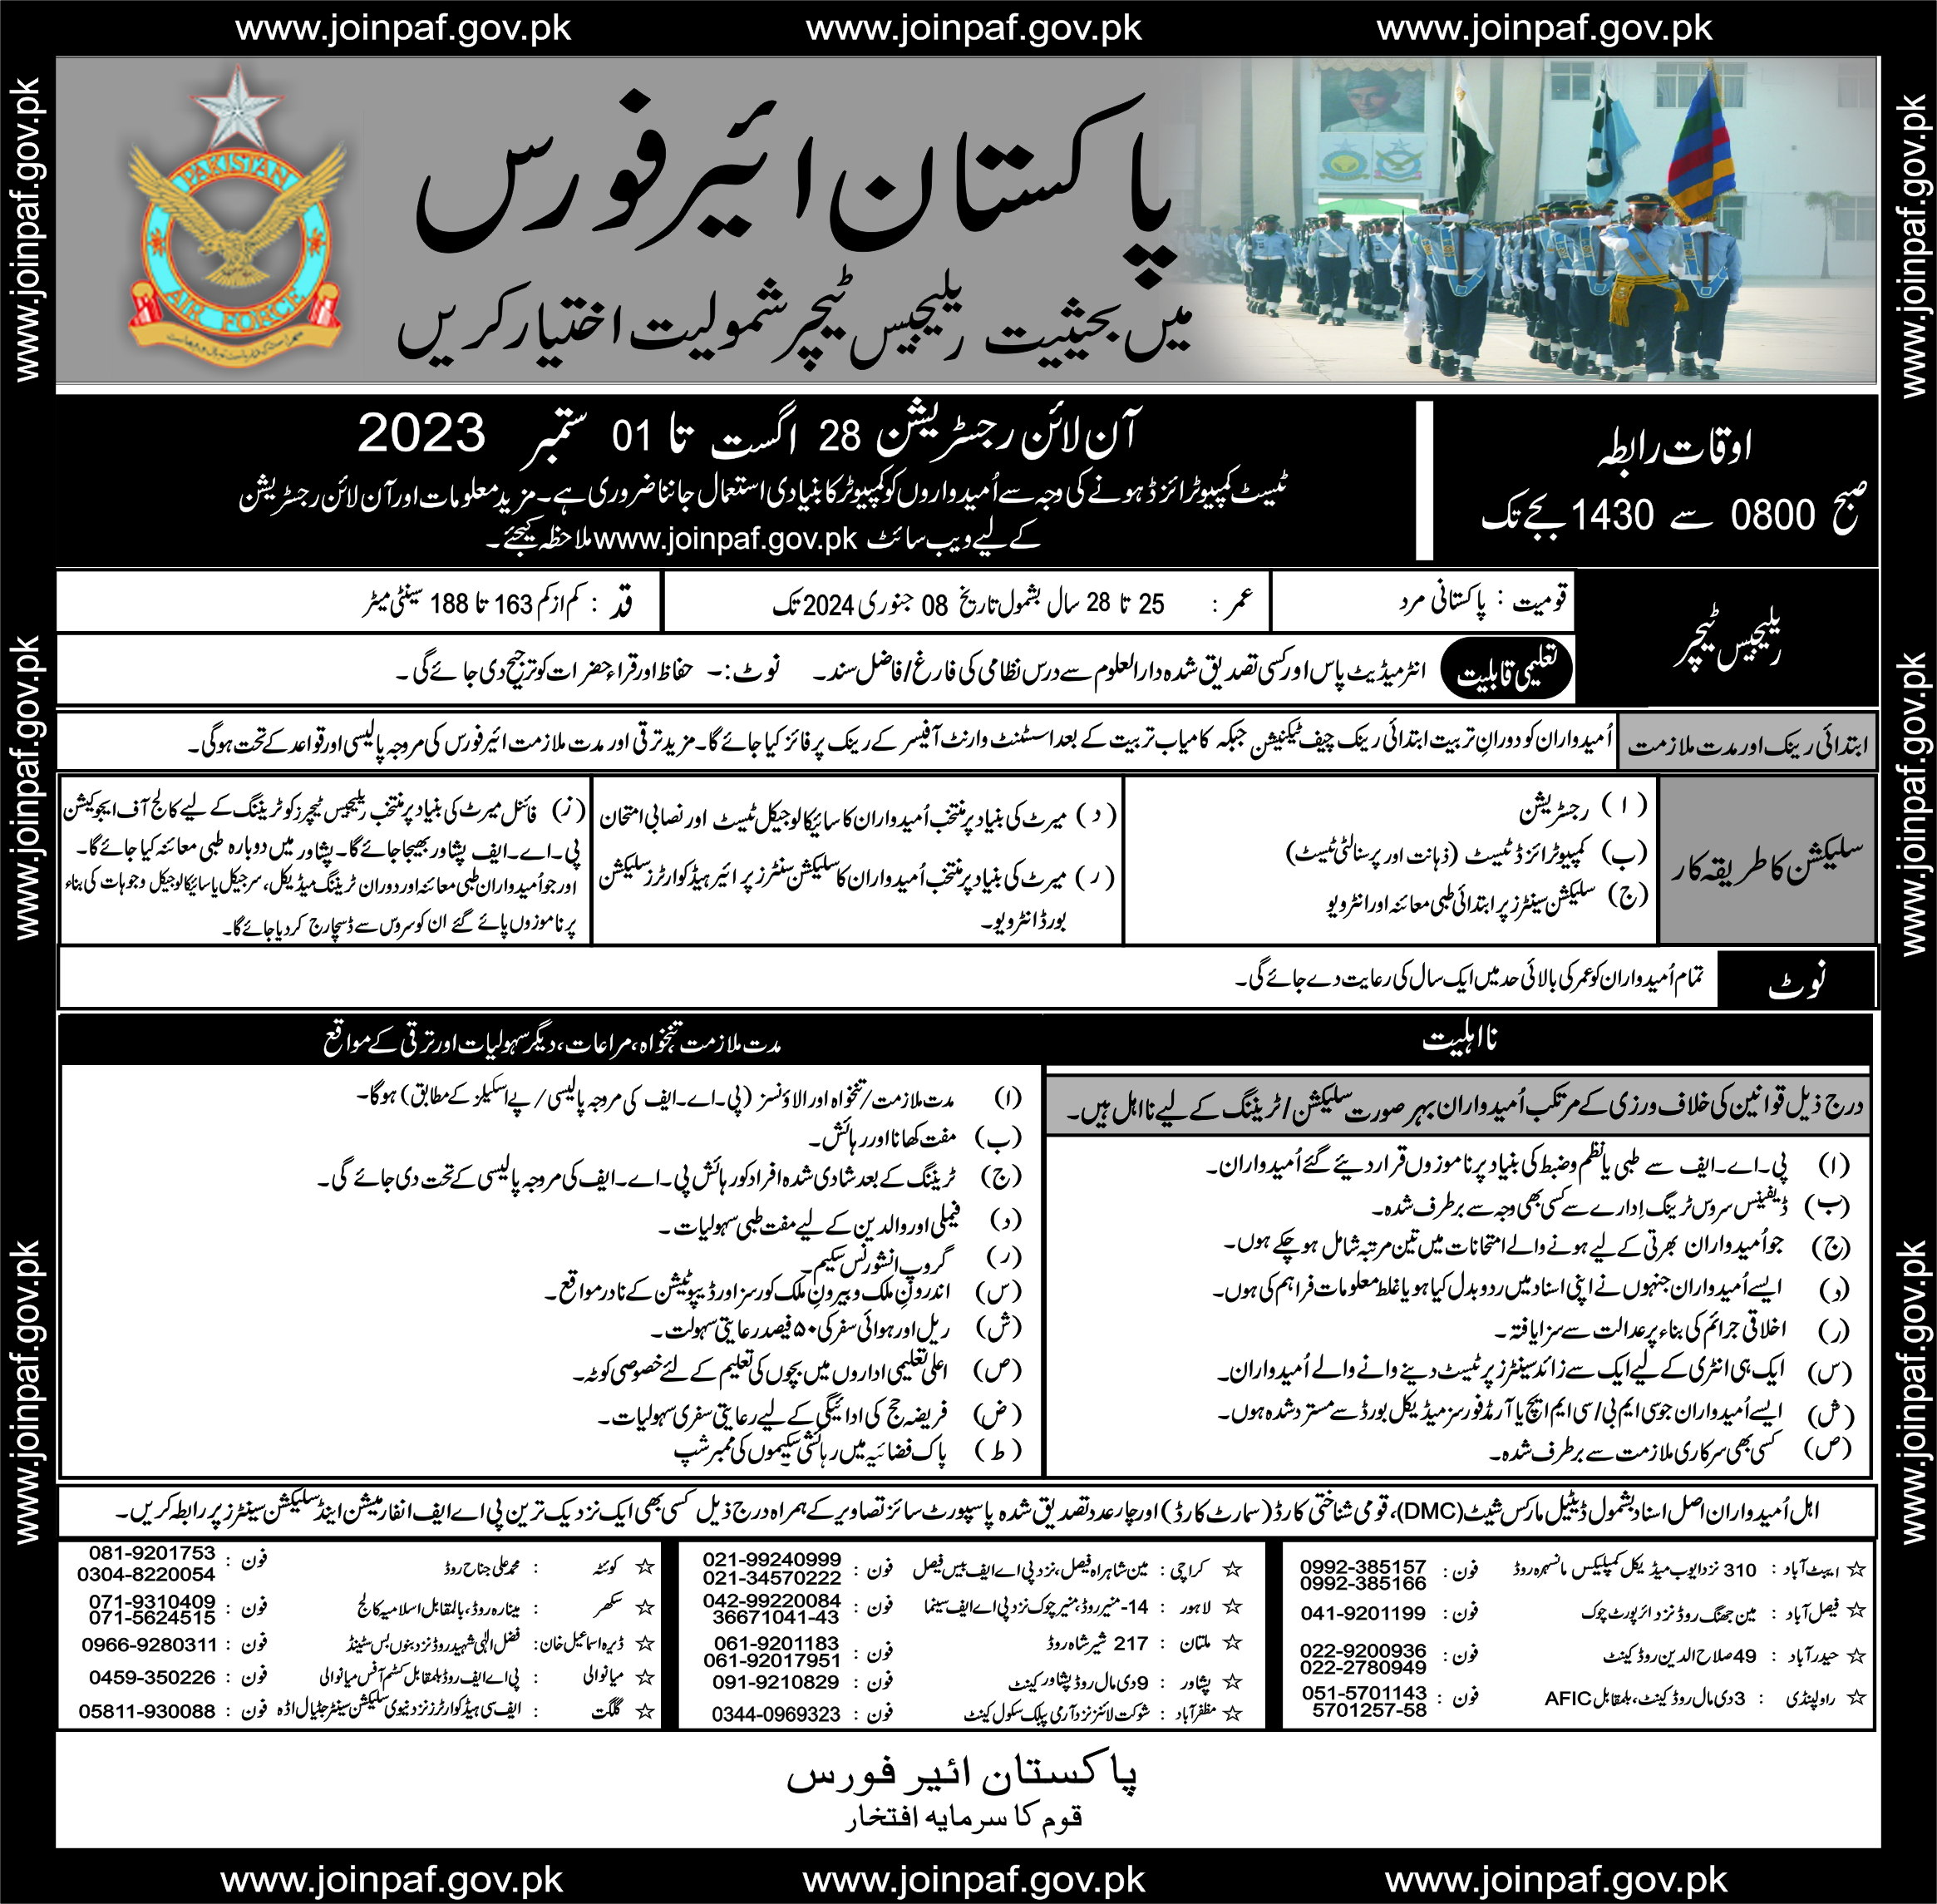 Government Jobs in Pakistan Today – Pakistan Air Force PAF Jobs 2023 – Online Apply via joinpaf.gov.pk